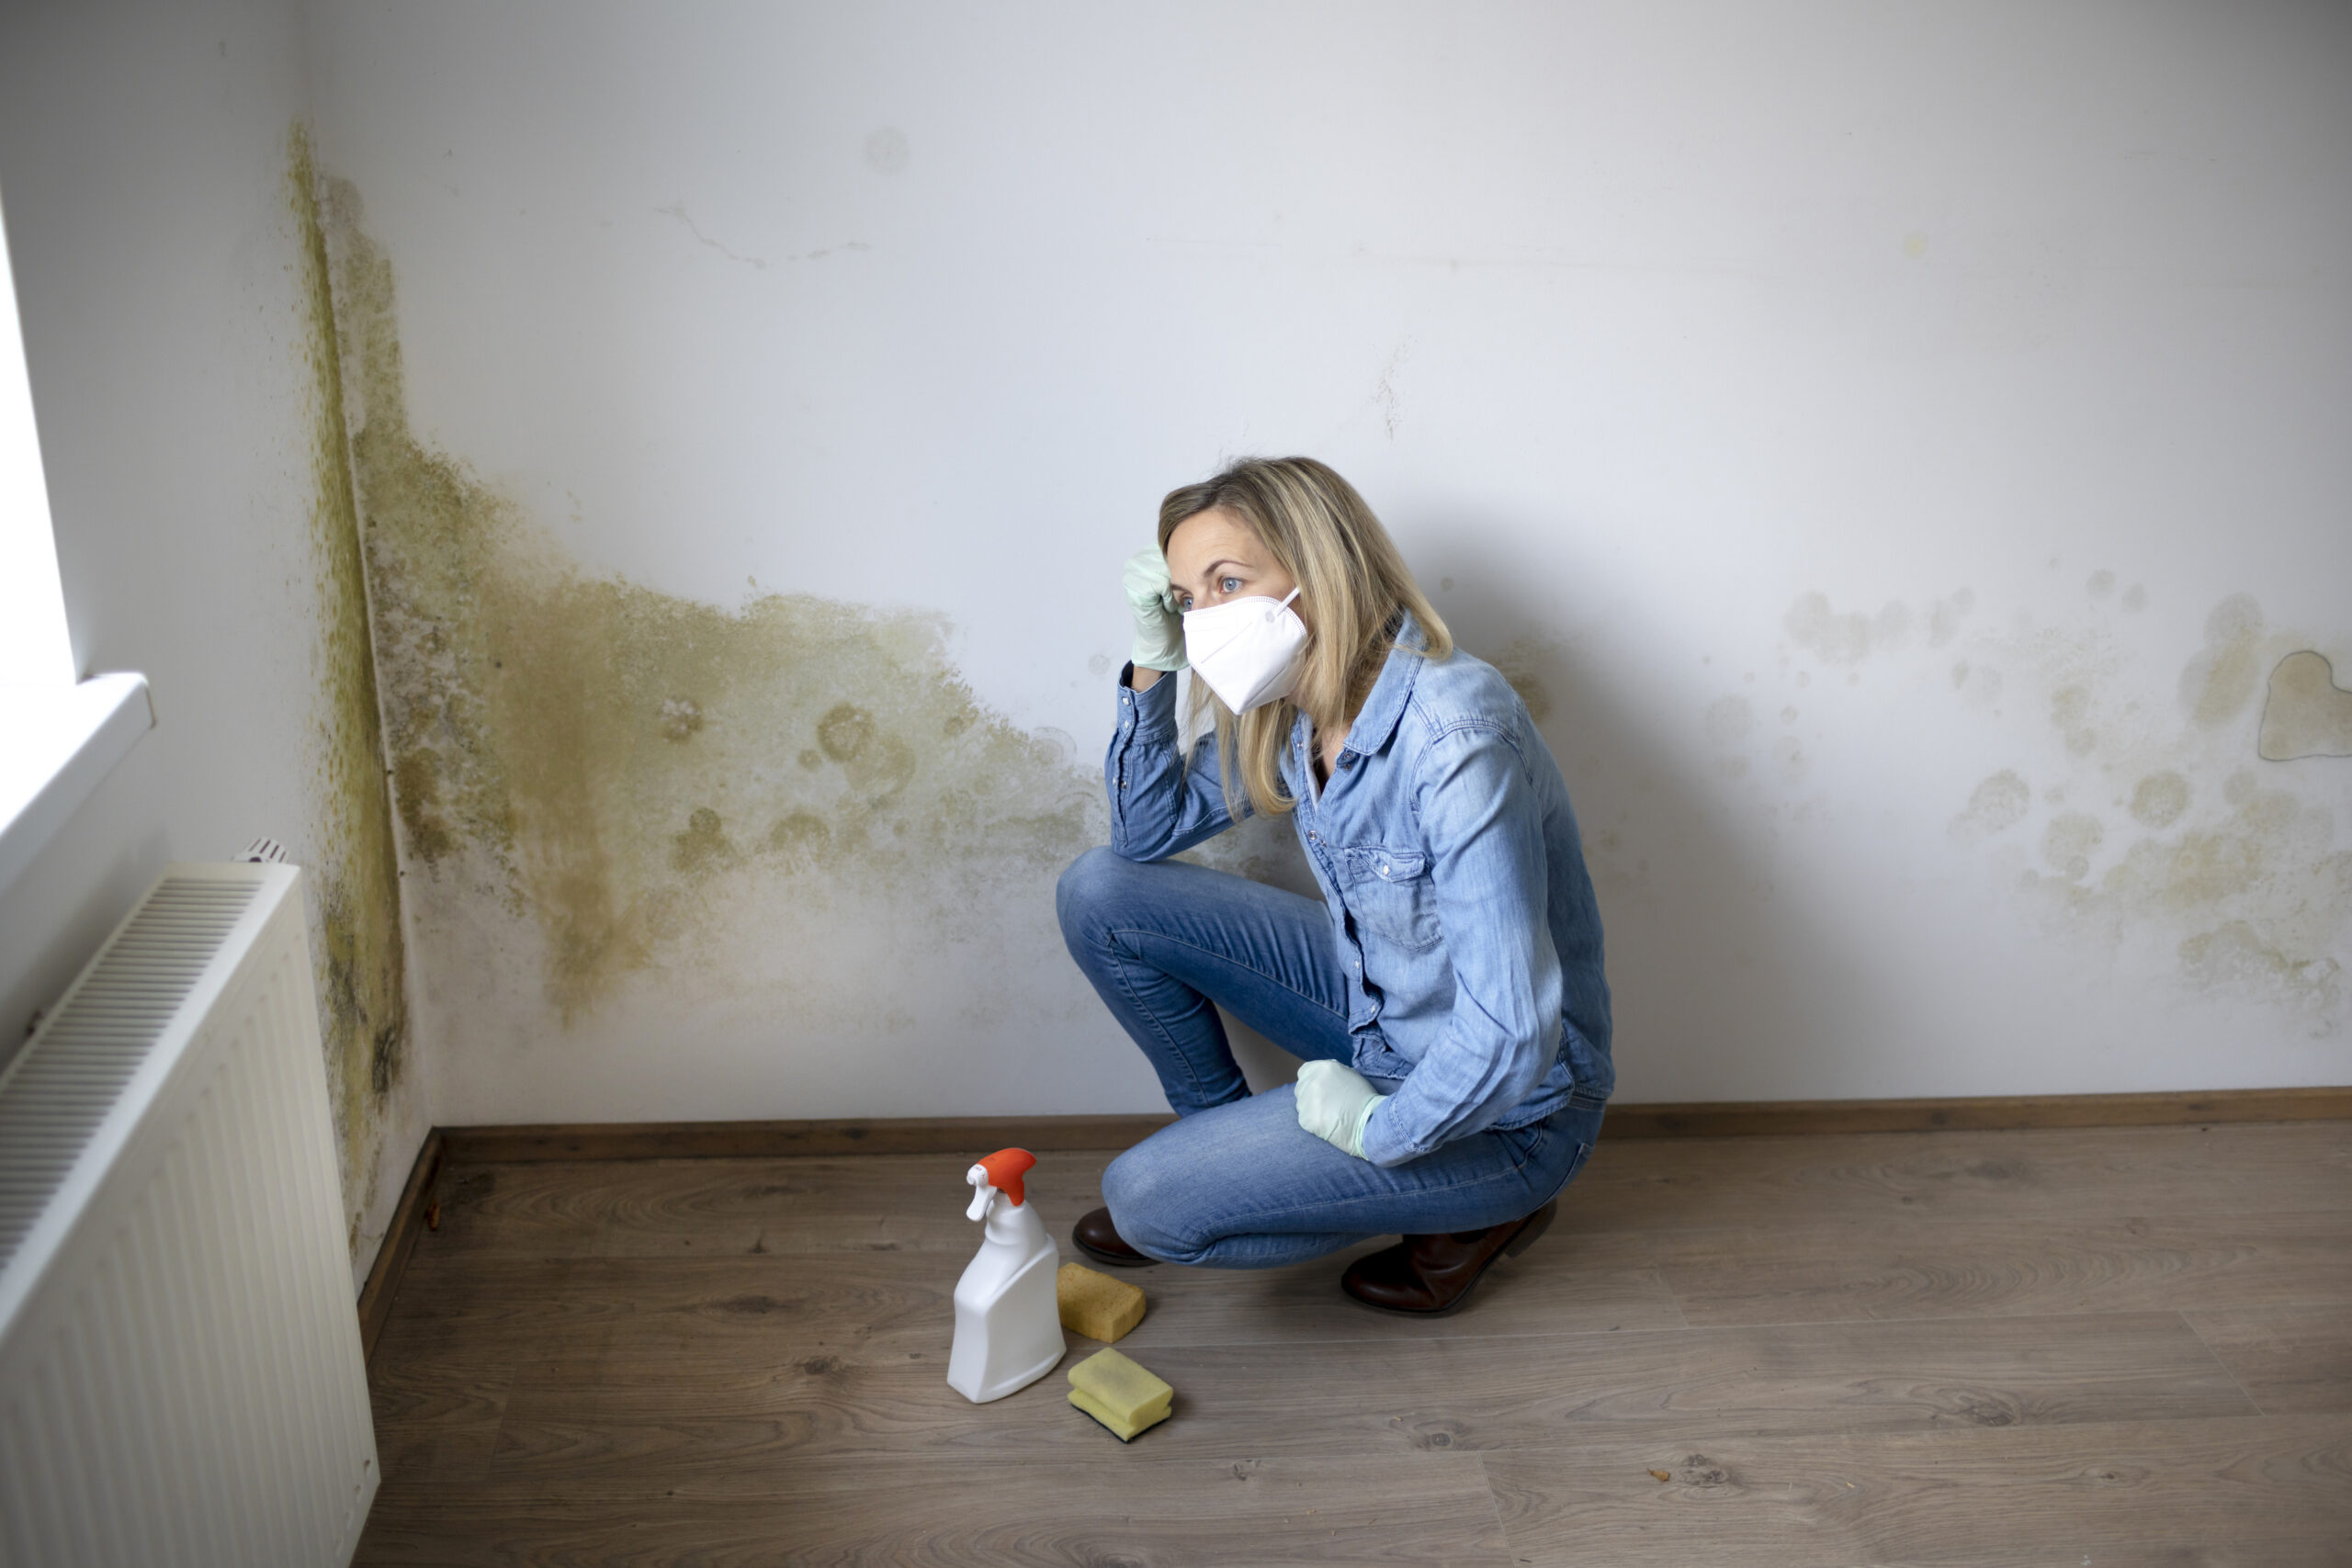 Blonde young woman is sitting in front of white apartment wall with mold on it and is frustrated